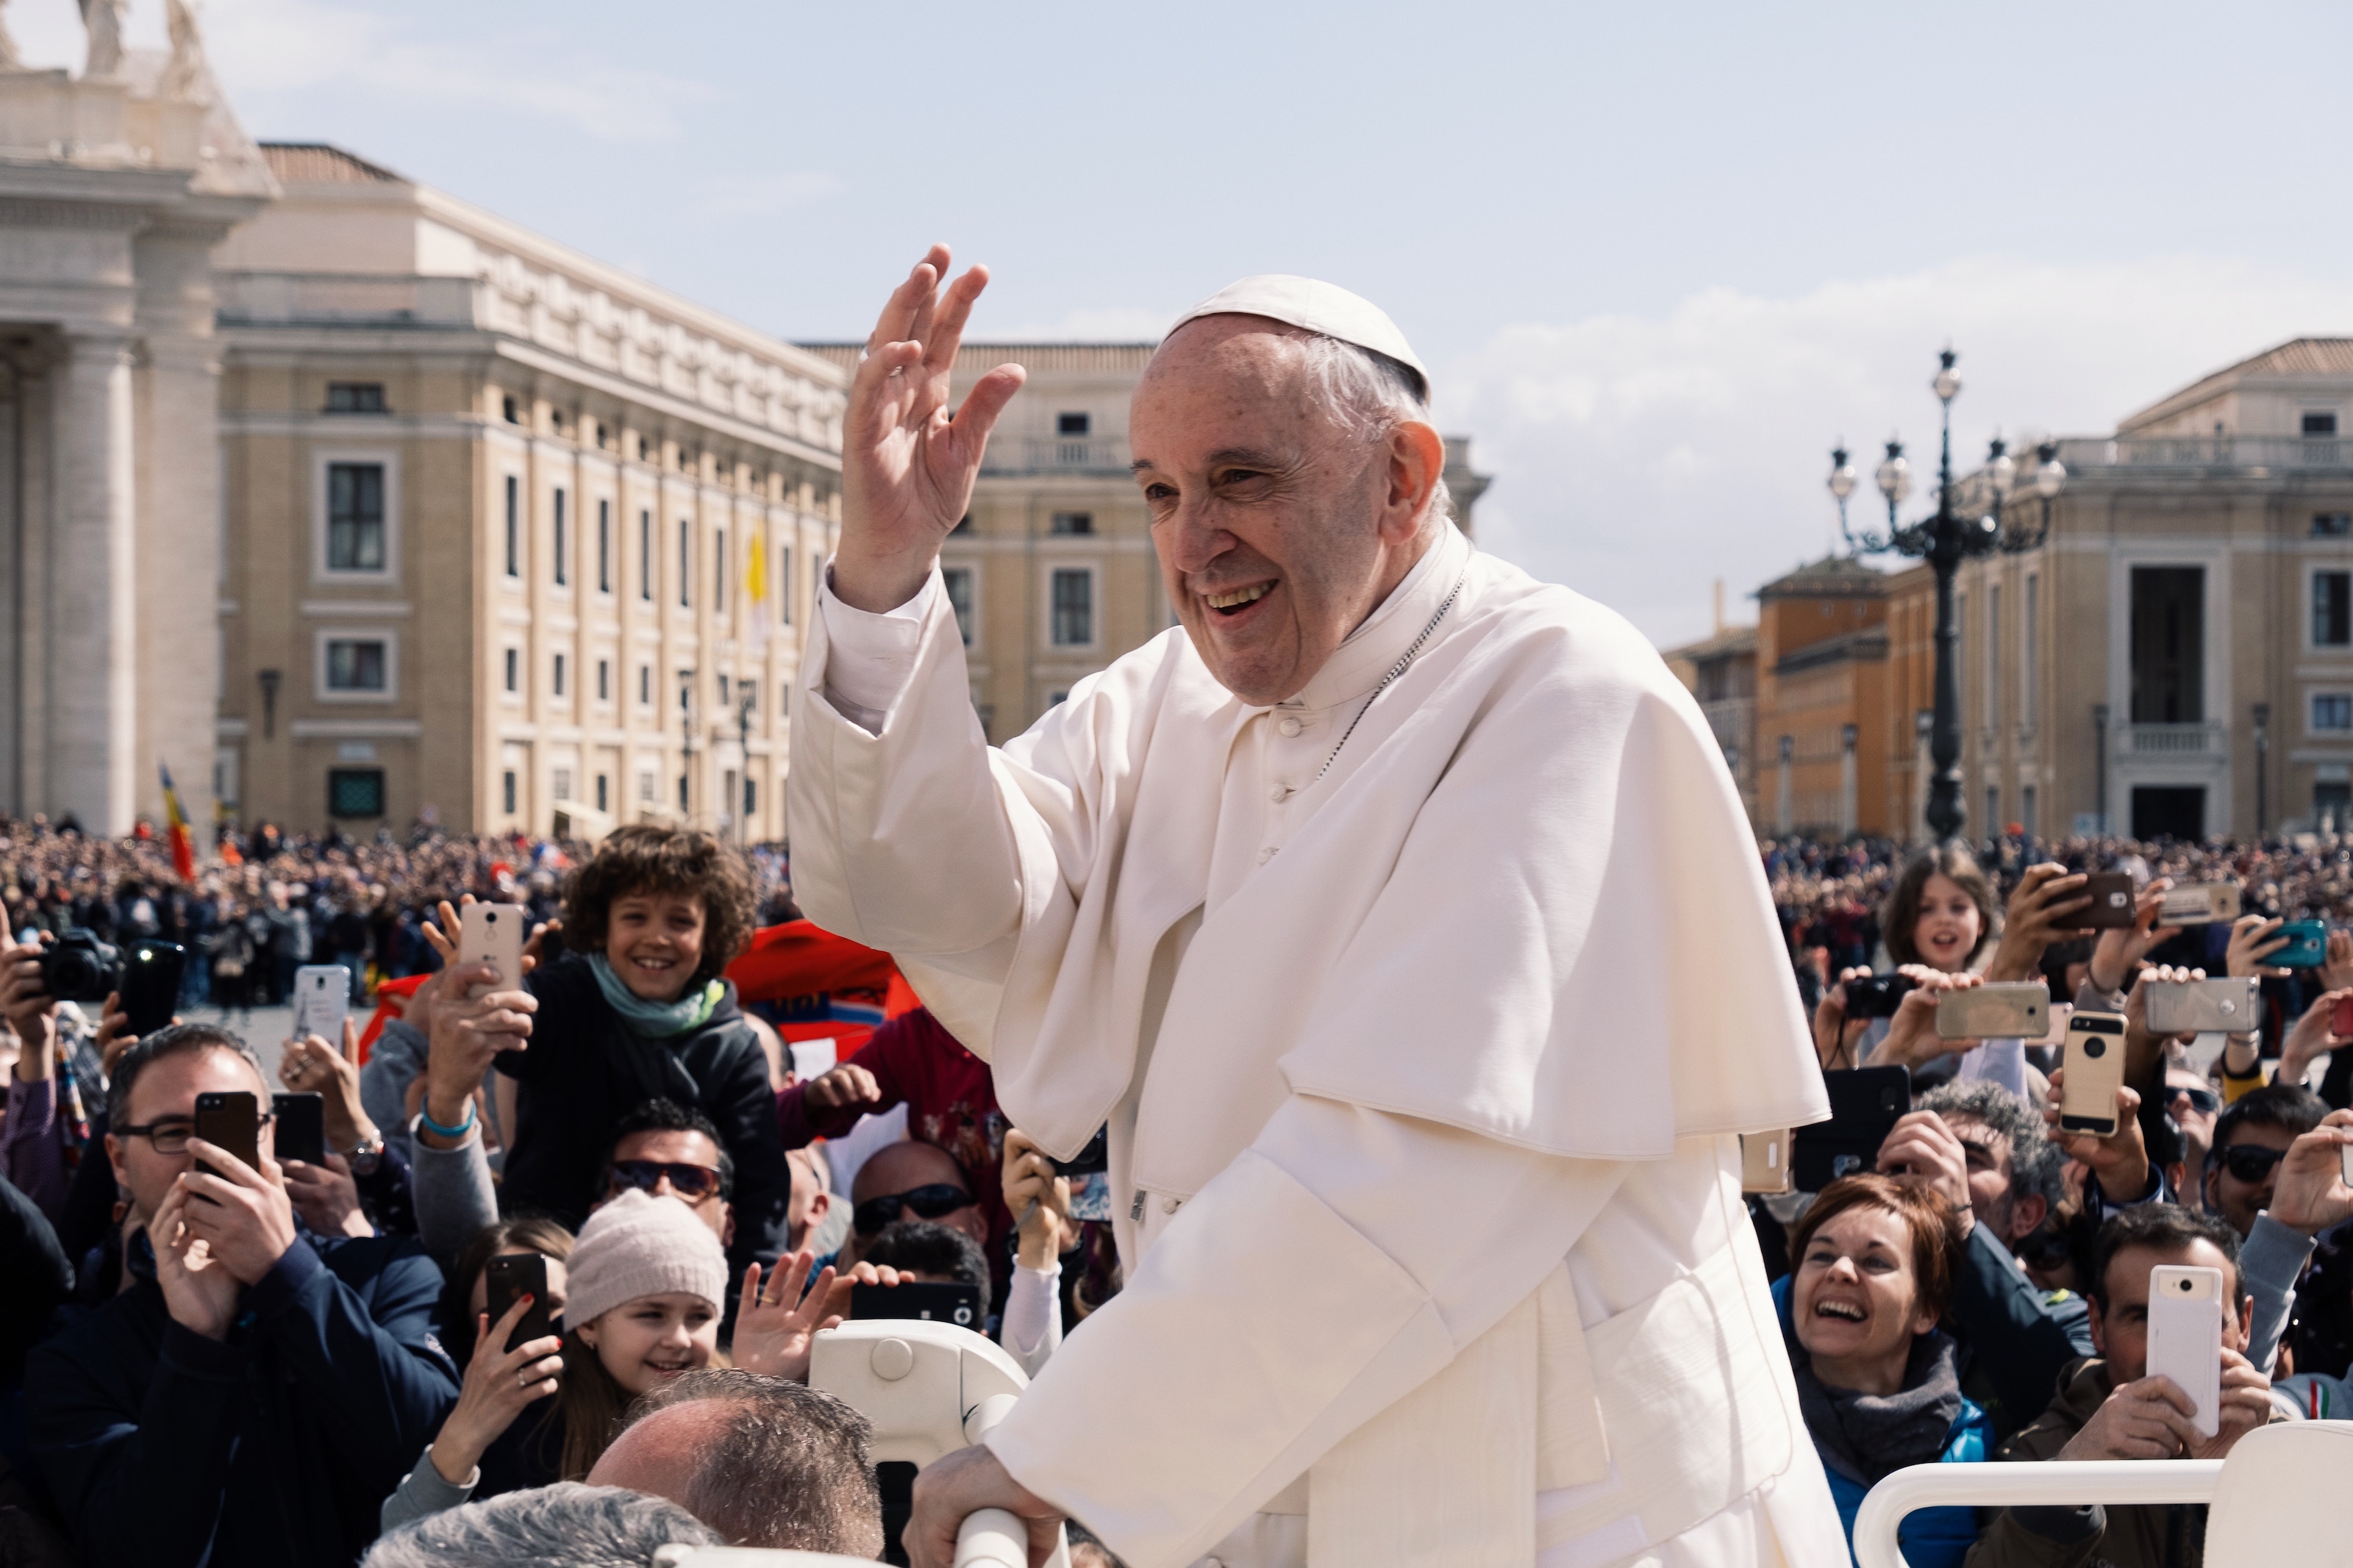 Pope Francis Quotes from the “Walk with Francis” DC Walk